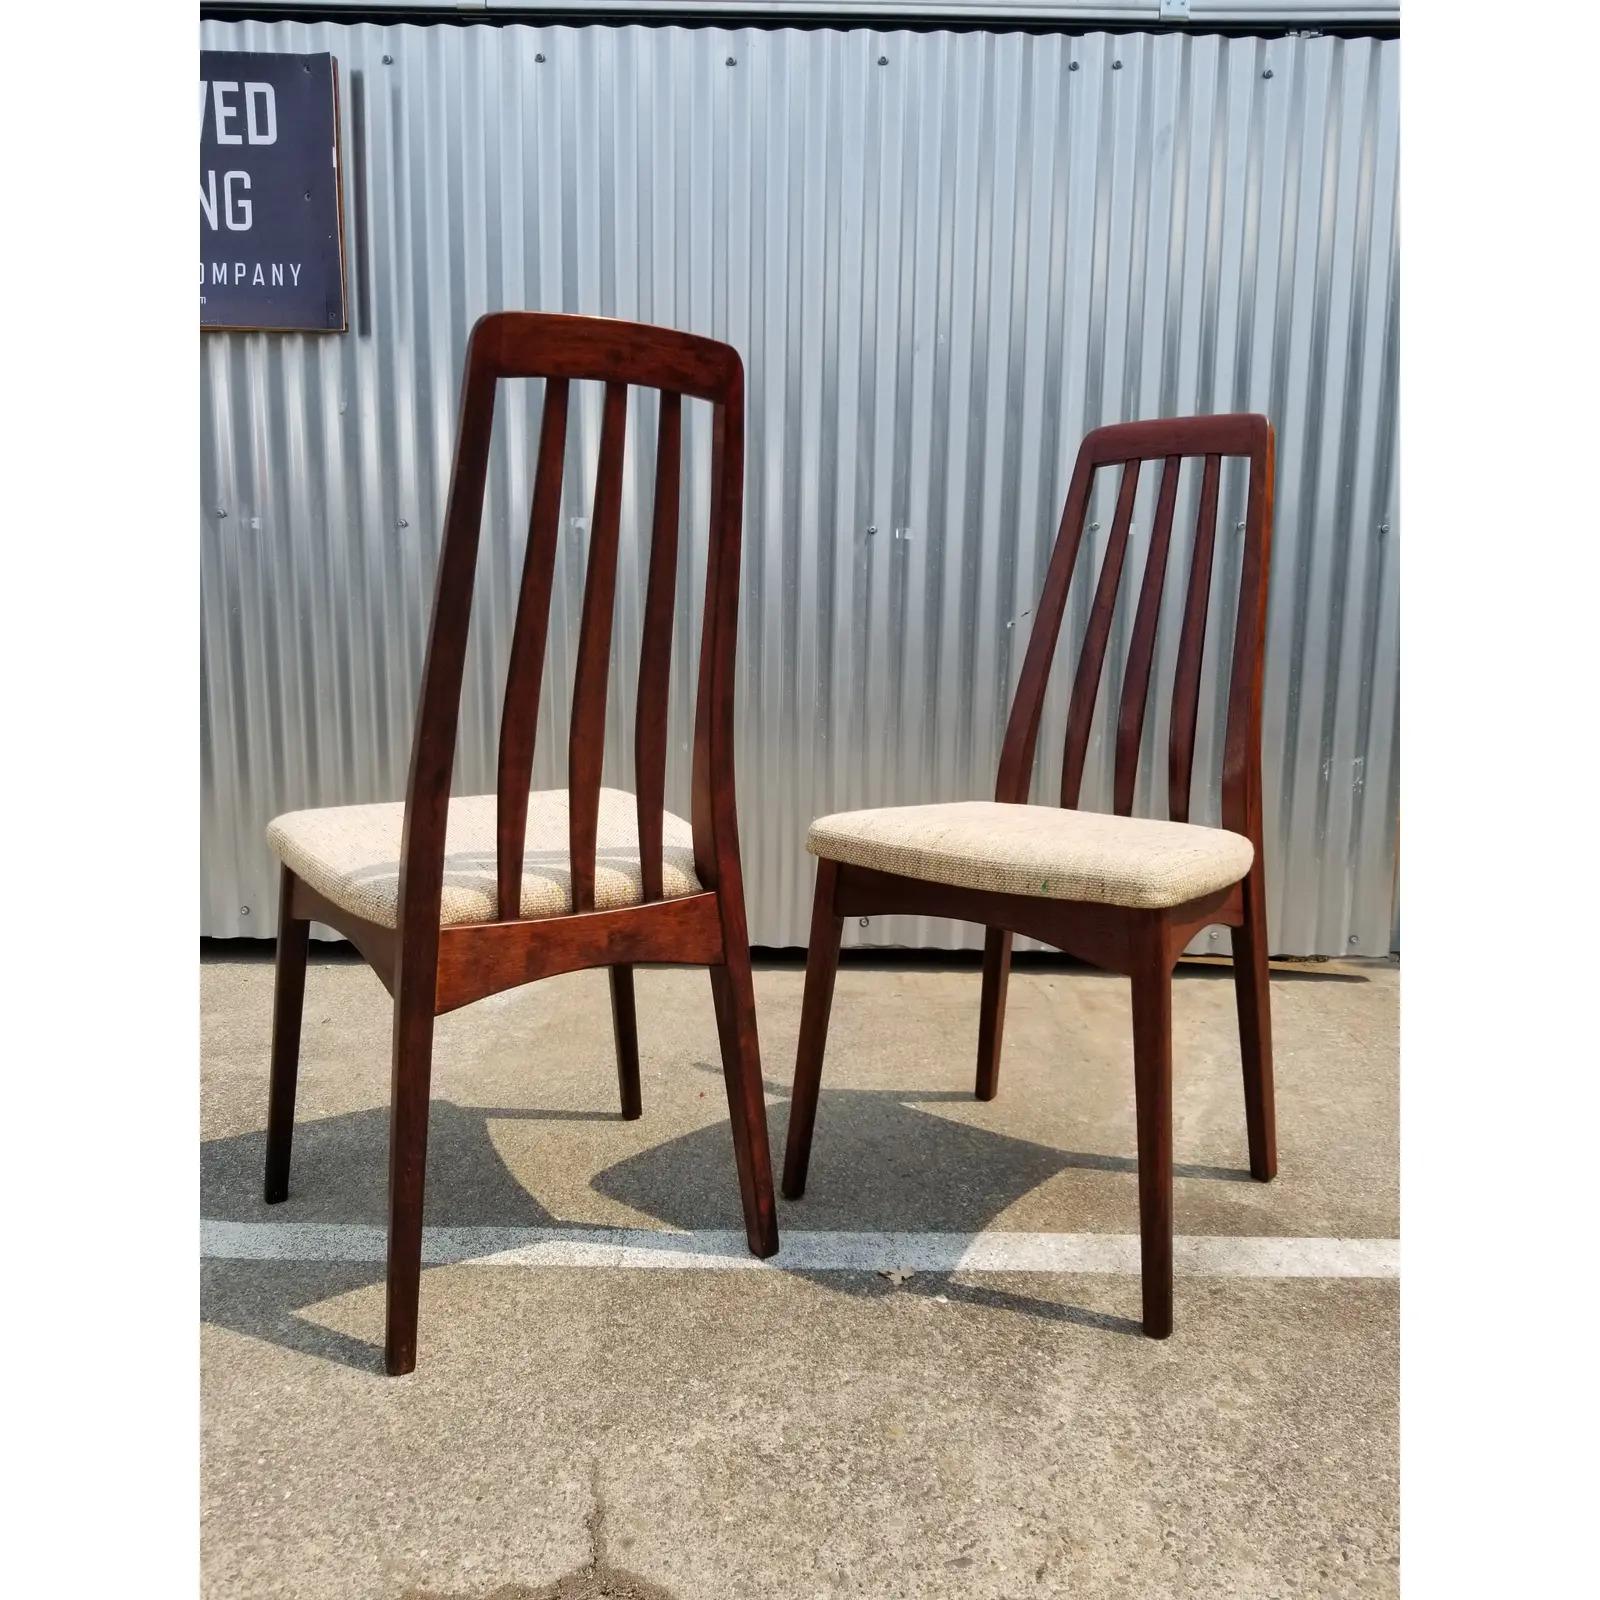 A pair of rosewood high back dining chairs by Svegards Mobelfabrik, Sweden, circa 1970s. The superior craftsmanship creates a very sturdy and structurally solid chair. Sculptural high back design adds comfort.